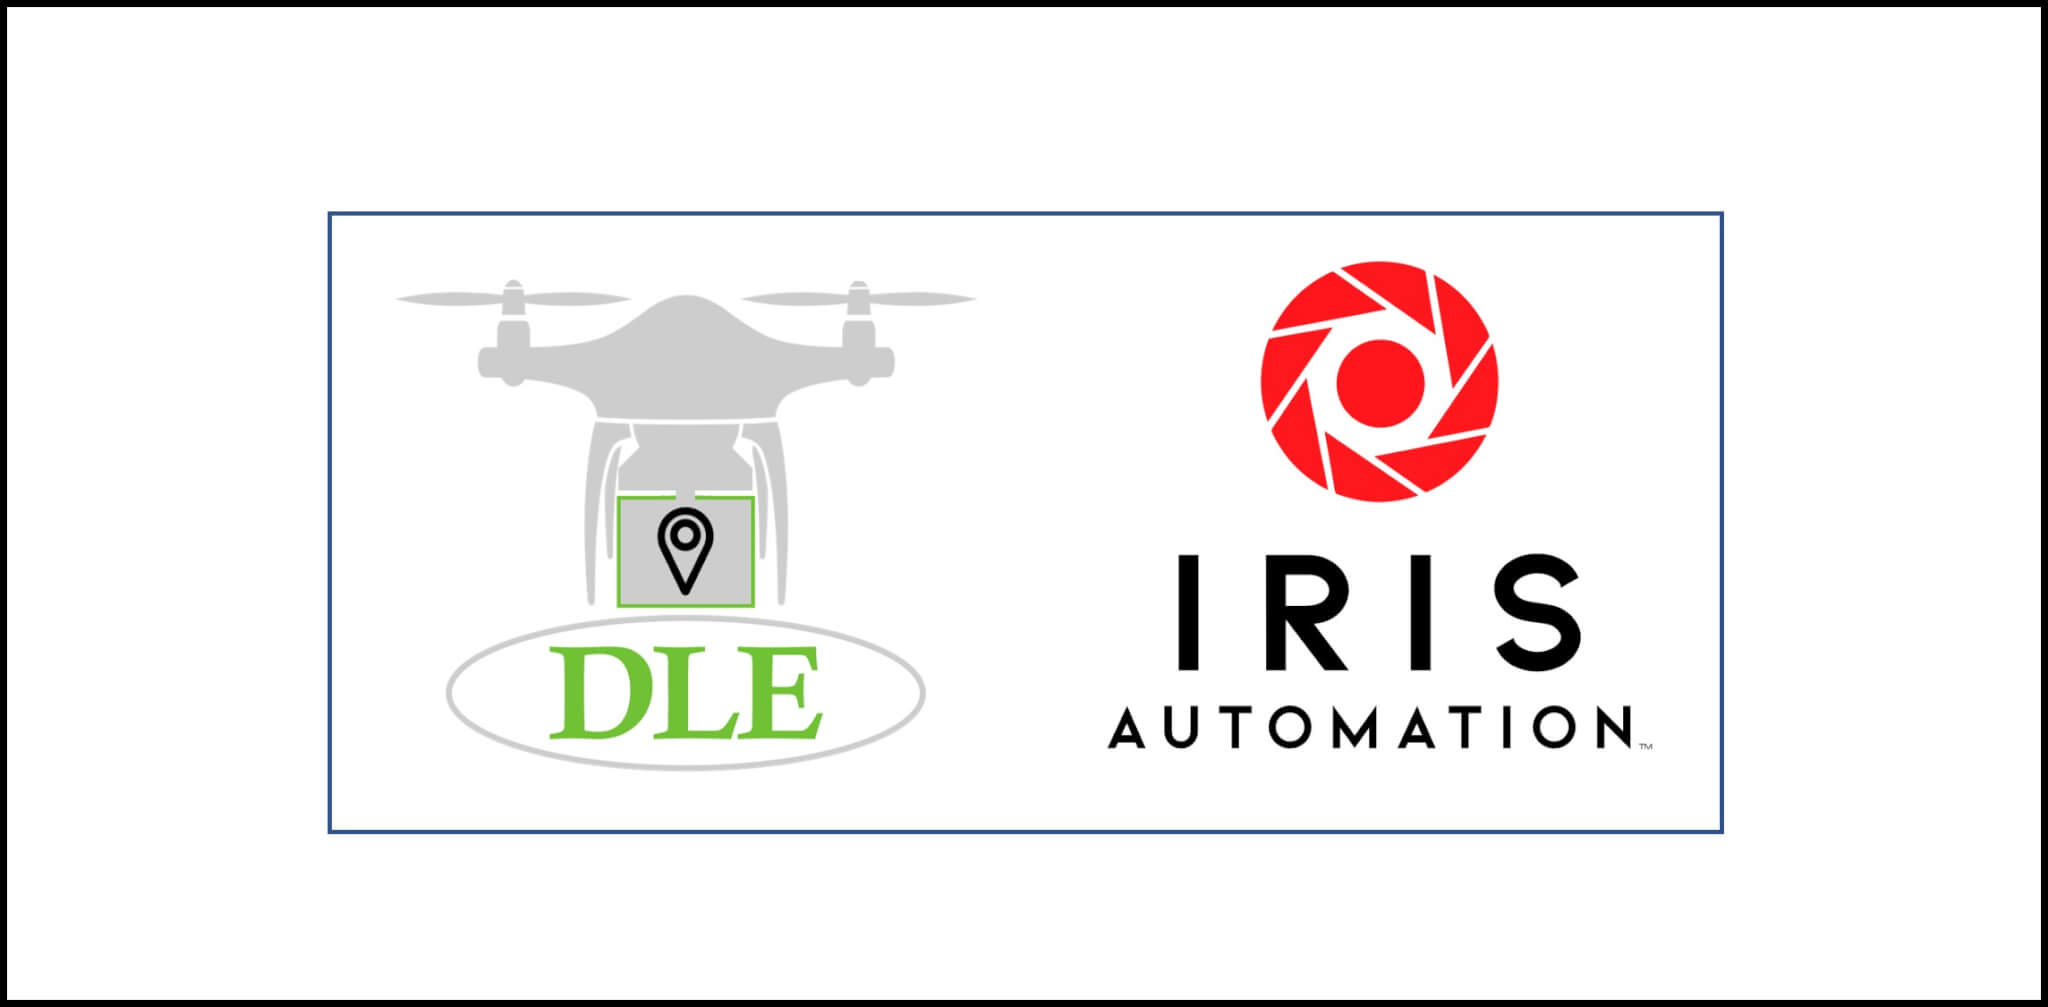 DLE is welcoming the US-based UAV Detect & Avoid company Iris Automation as its new member